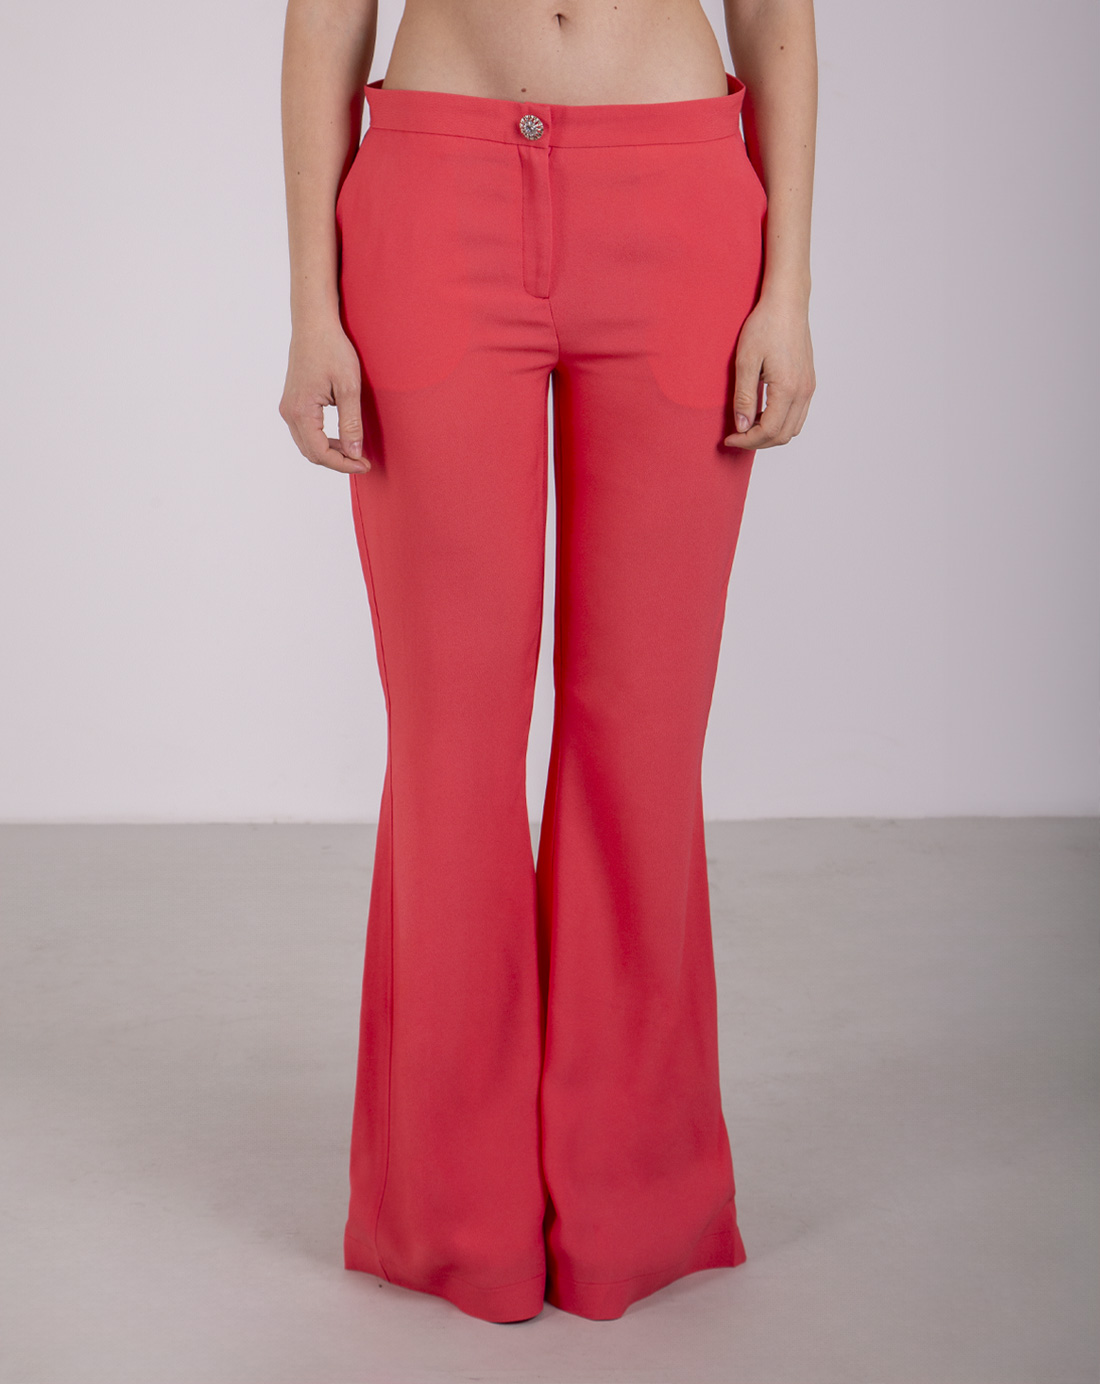 Coral-colored flare pants